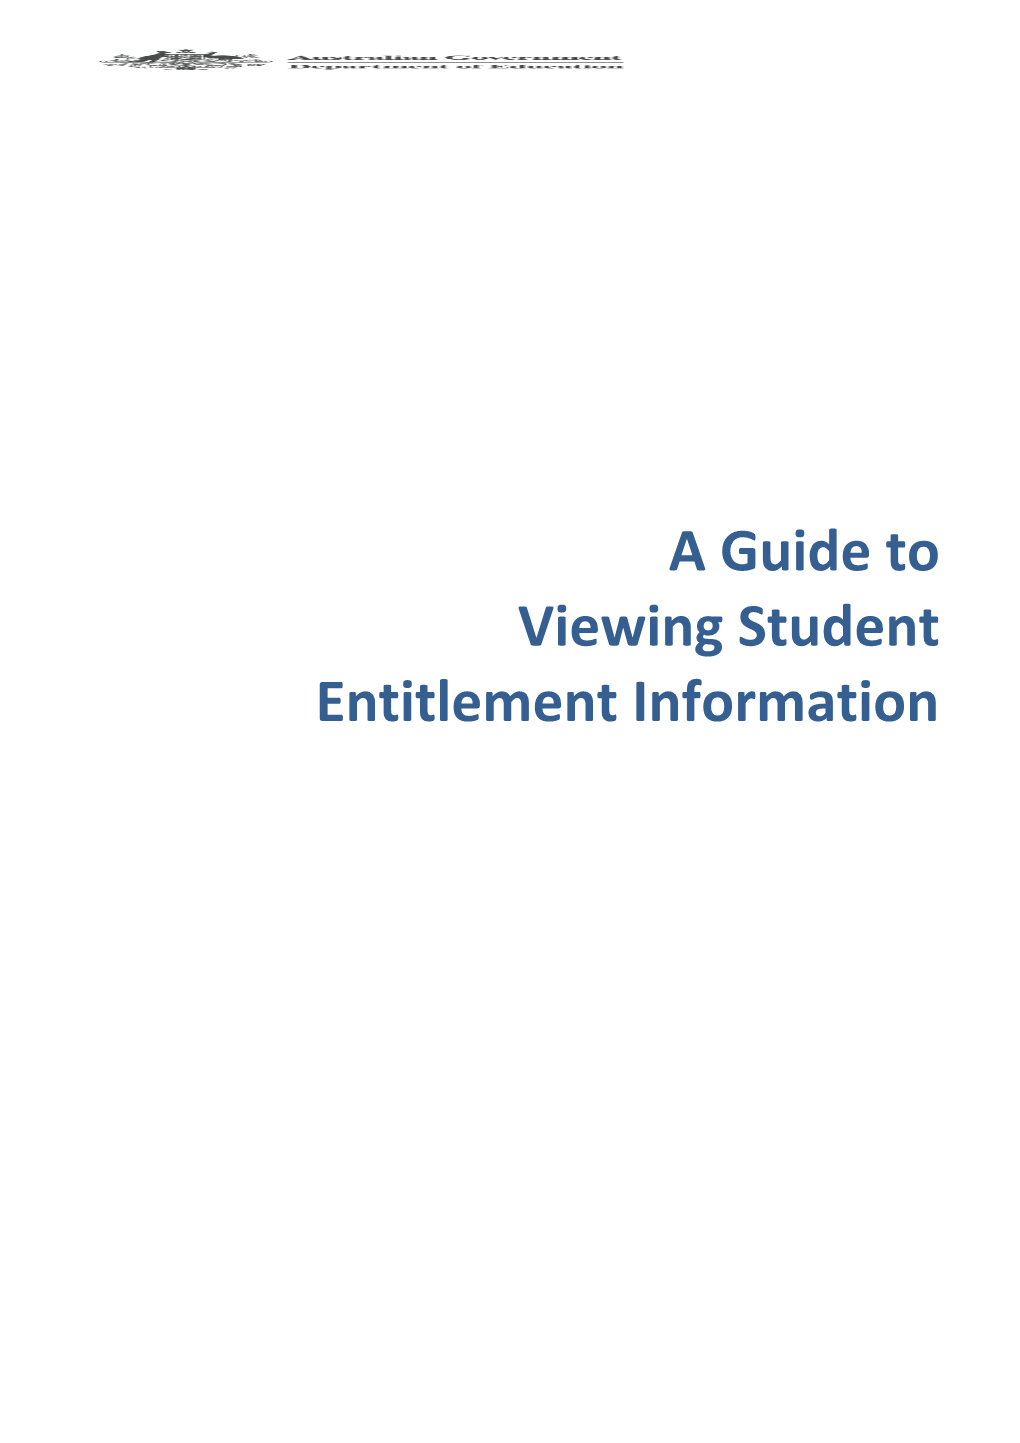 HEIMS Administration - Guide to Viewing Student Entitlement